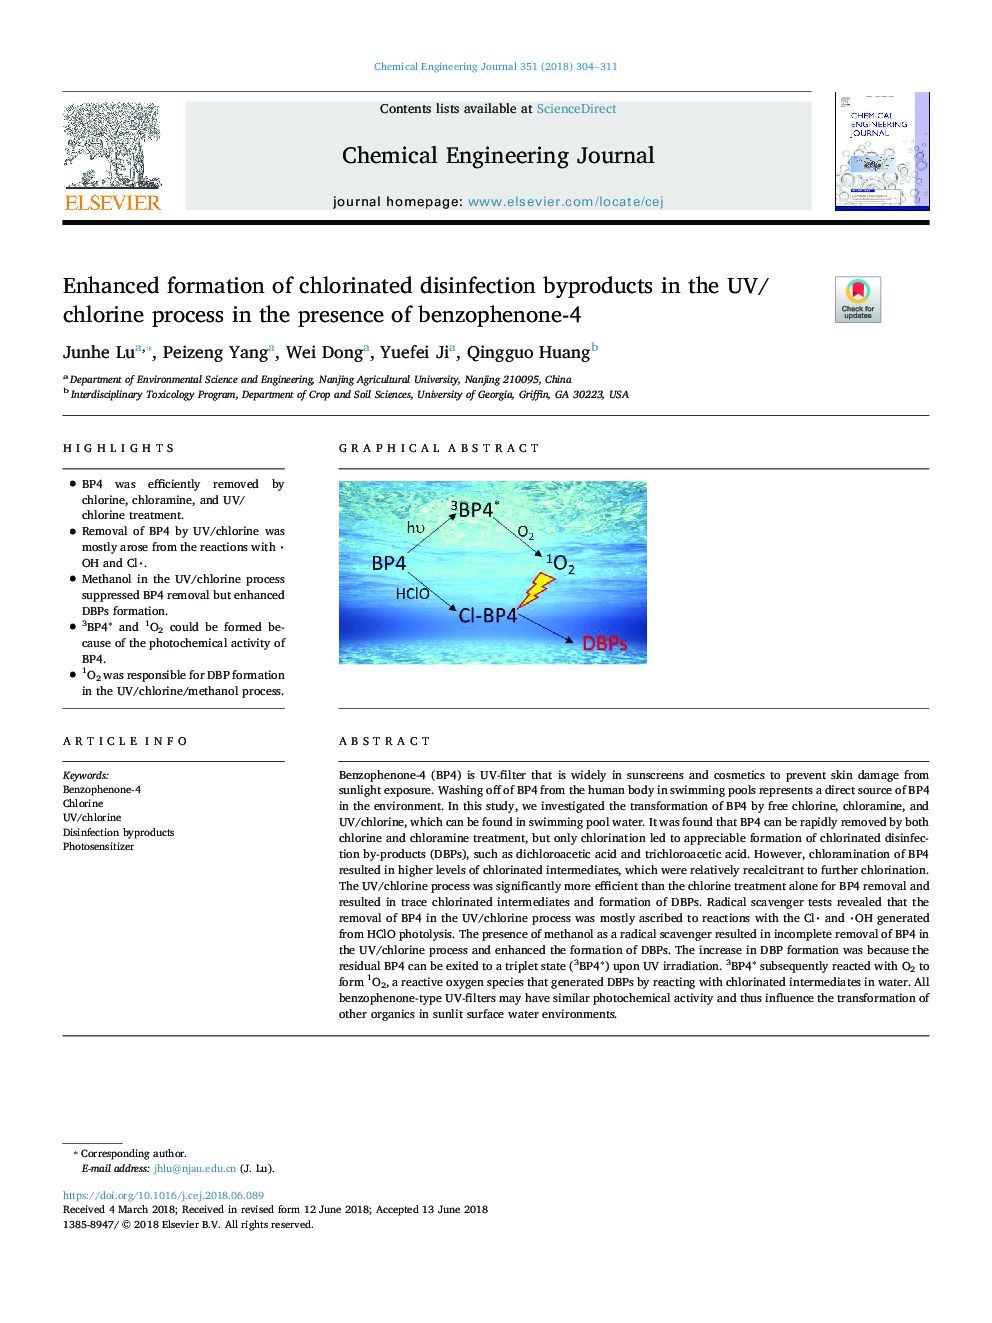 Enhanced formation of chlorinated disinfection byproducts in the UV/chlorine process in the presence of benzophenone-4